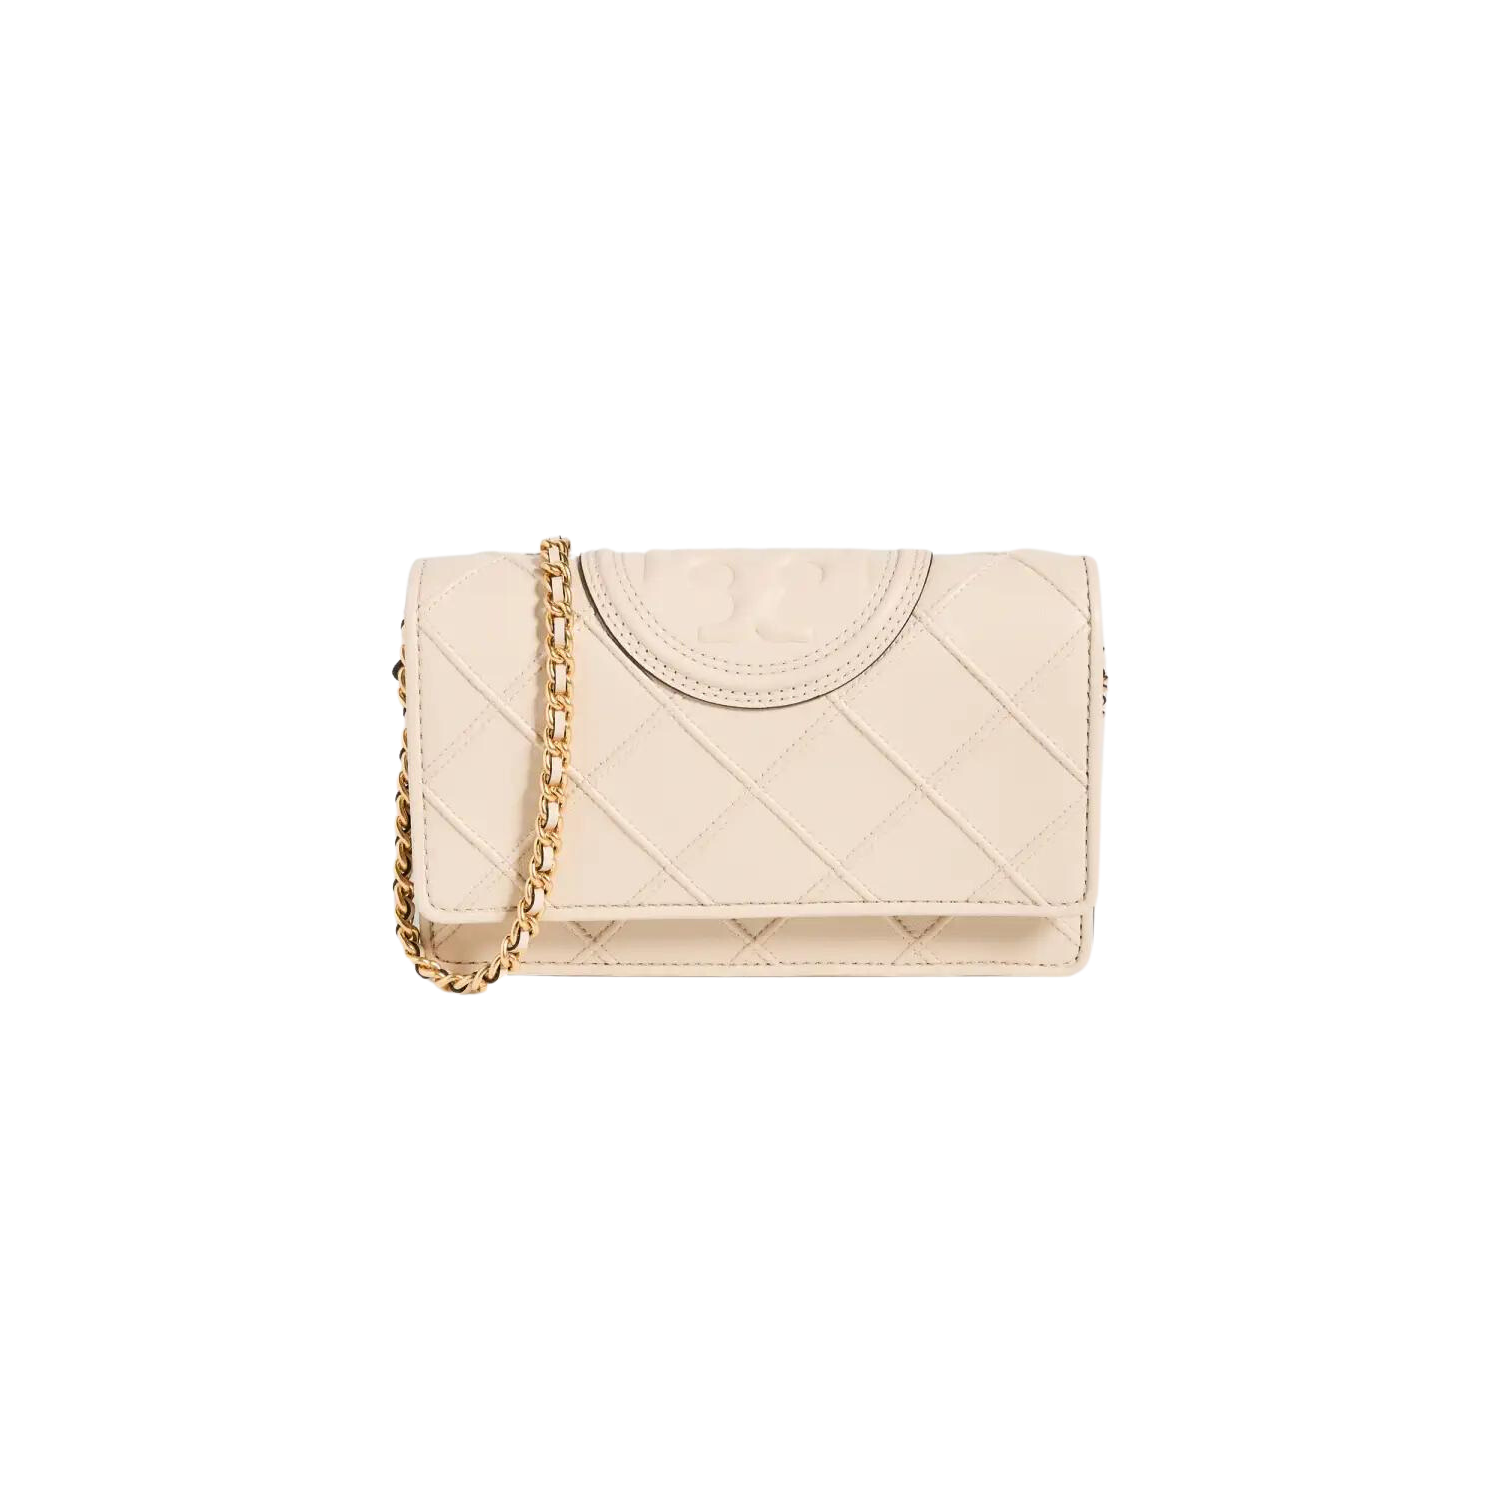 Tory Burch Fleming Soft Chain Wallet, $448